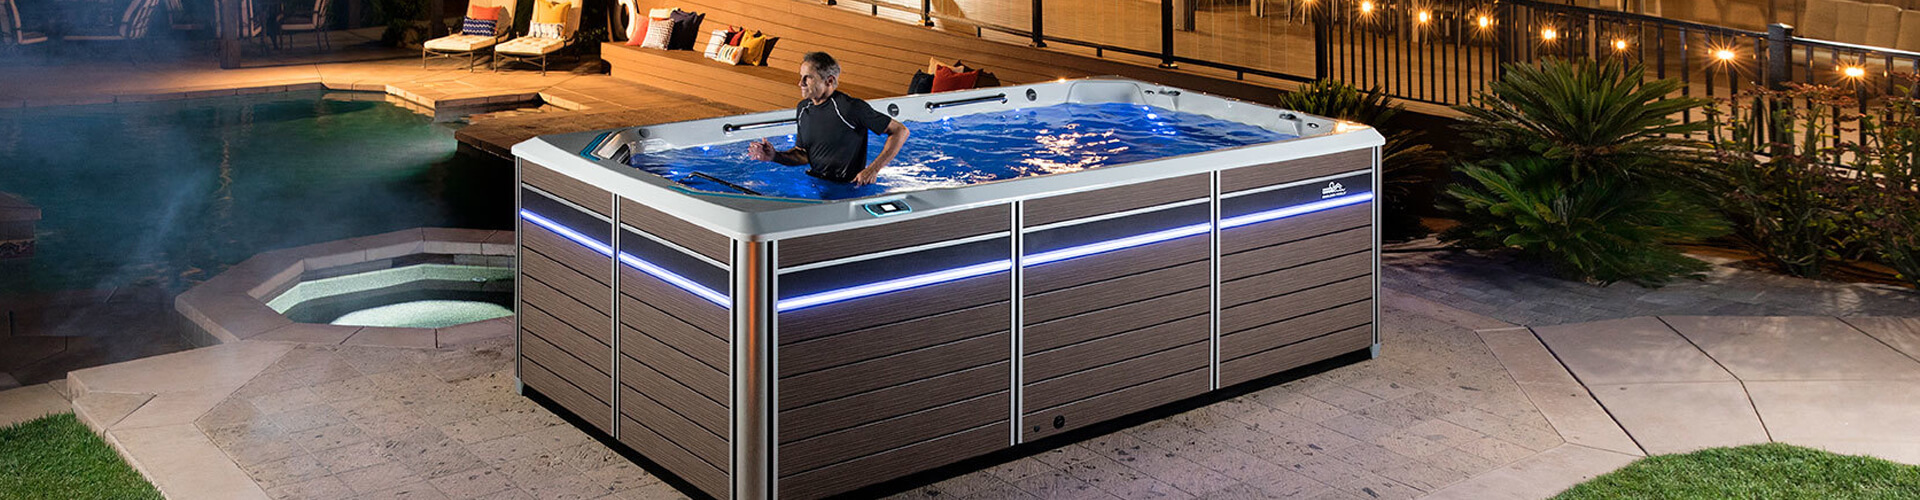 Safe, Effective Exercise in a Lap Pool, Swim Spas Milwaukee